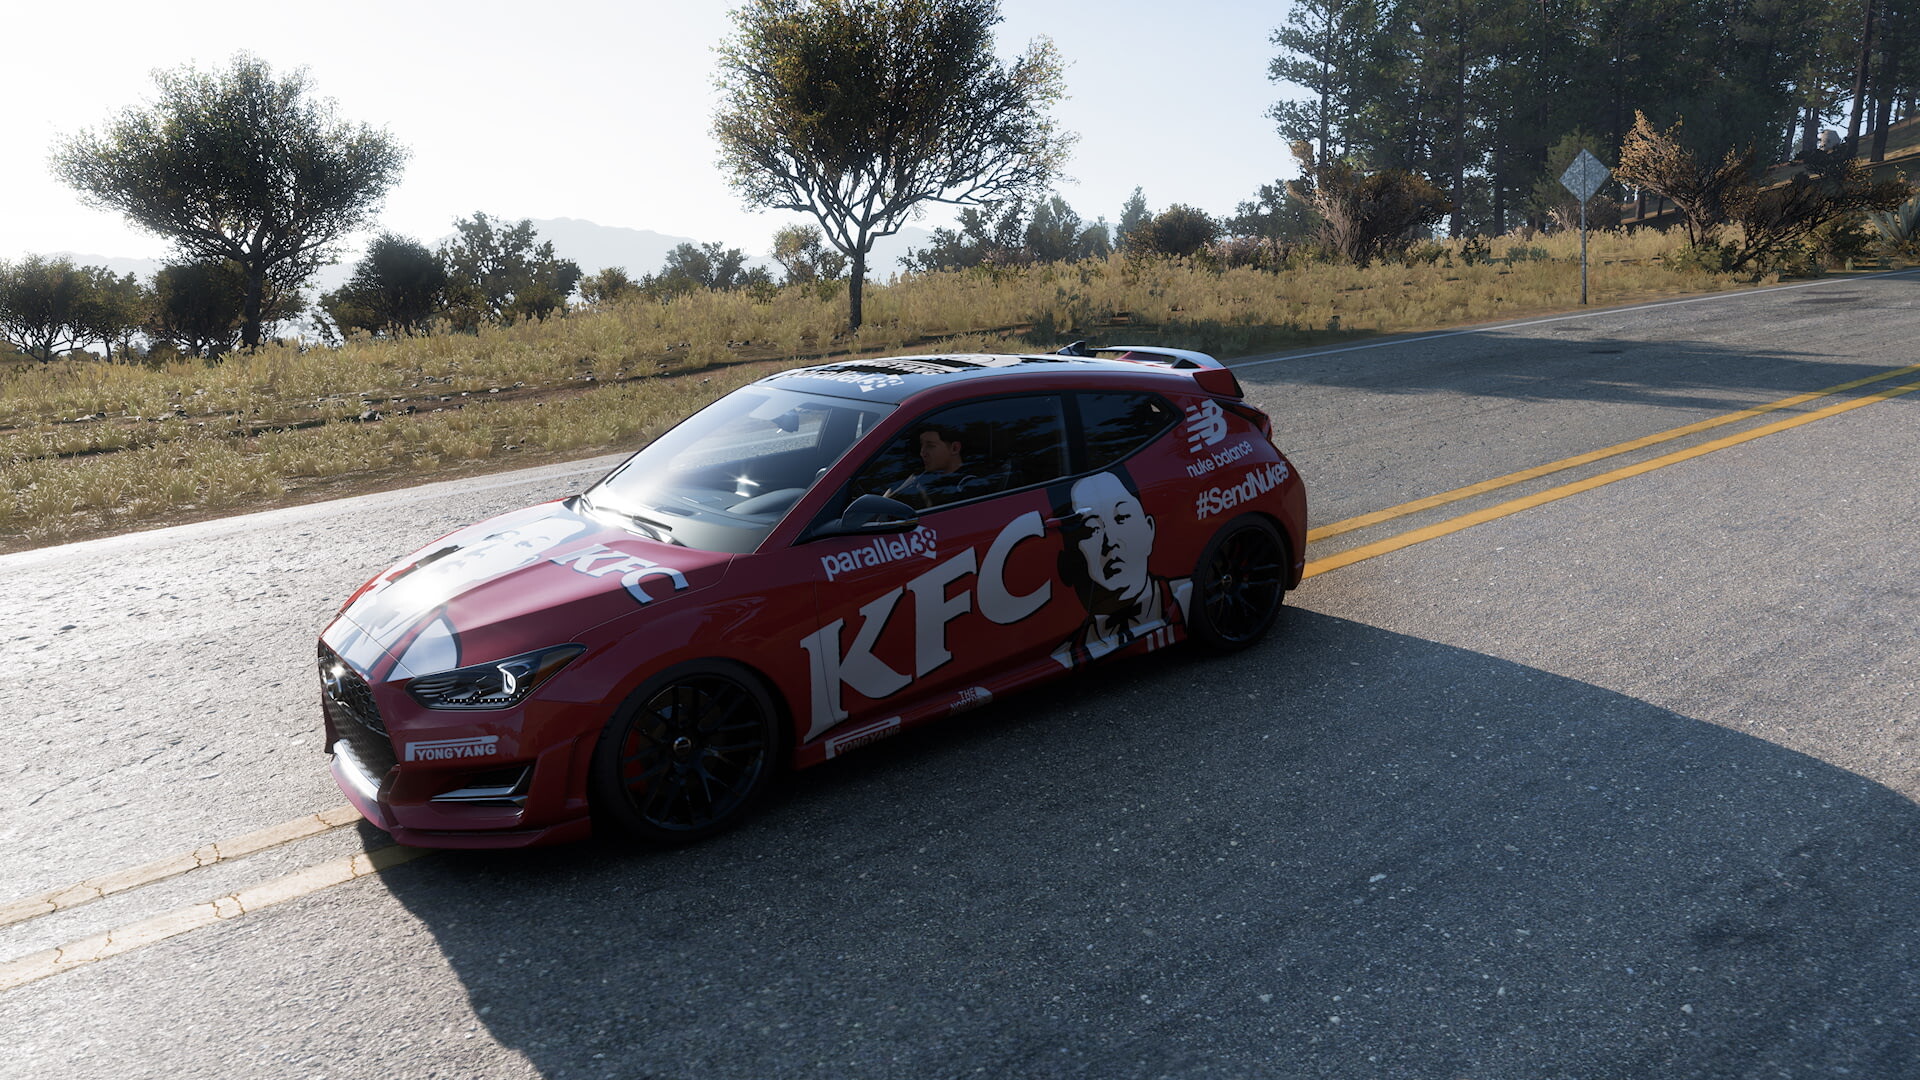 Player banned from Forza Horizon 5 for 8,000 years for portraying Kim Jong-un in a car